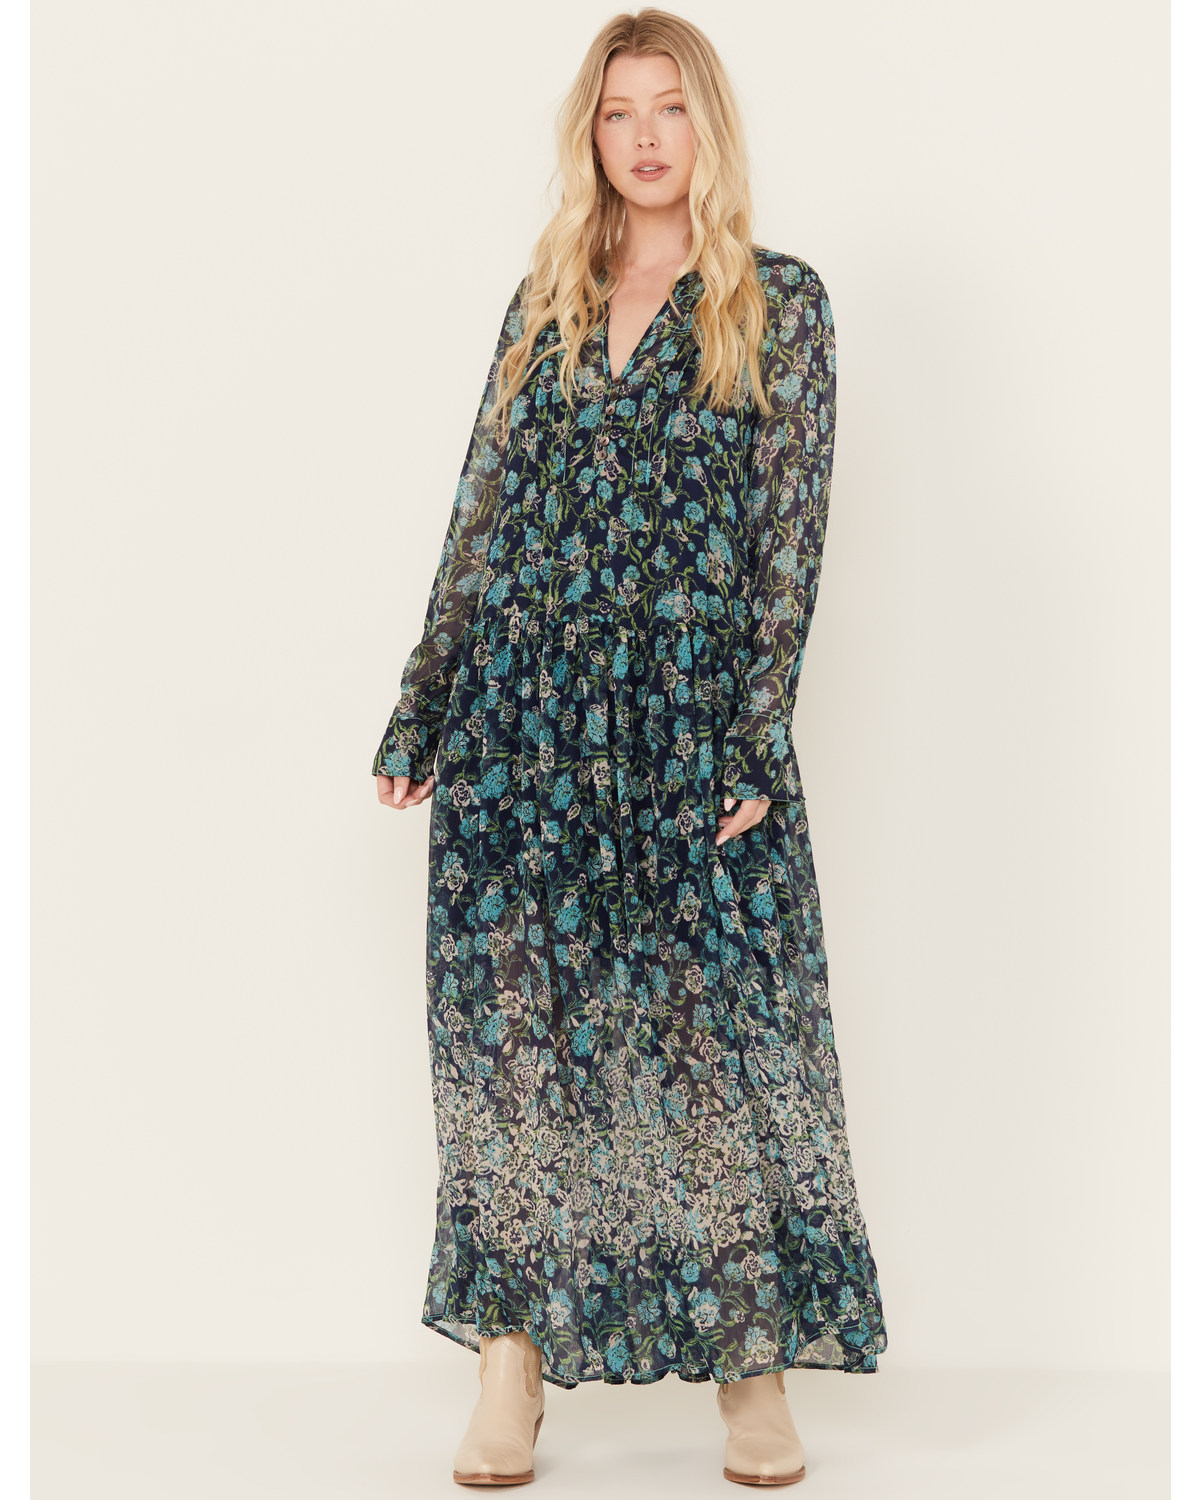 Free People Women's See It Through Floral Long Sleeve Maxi Dress